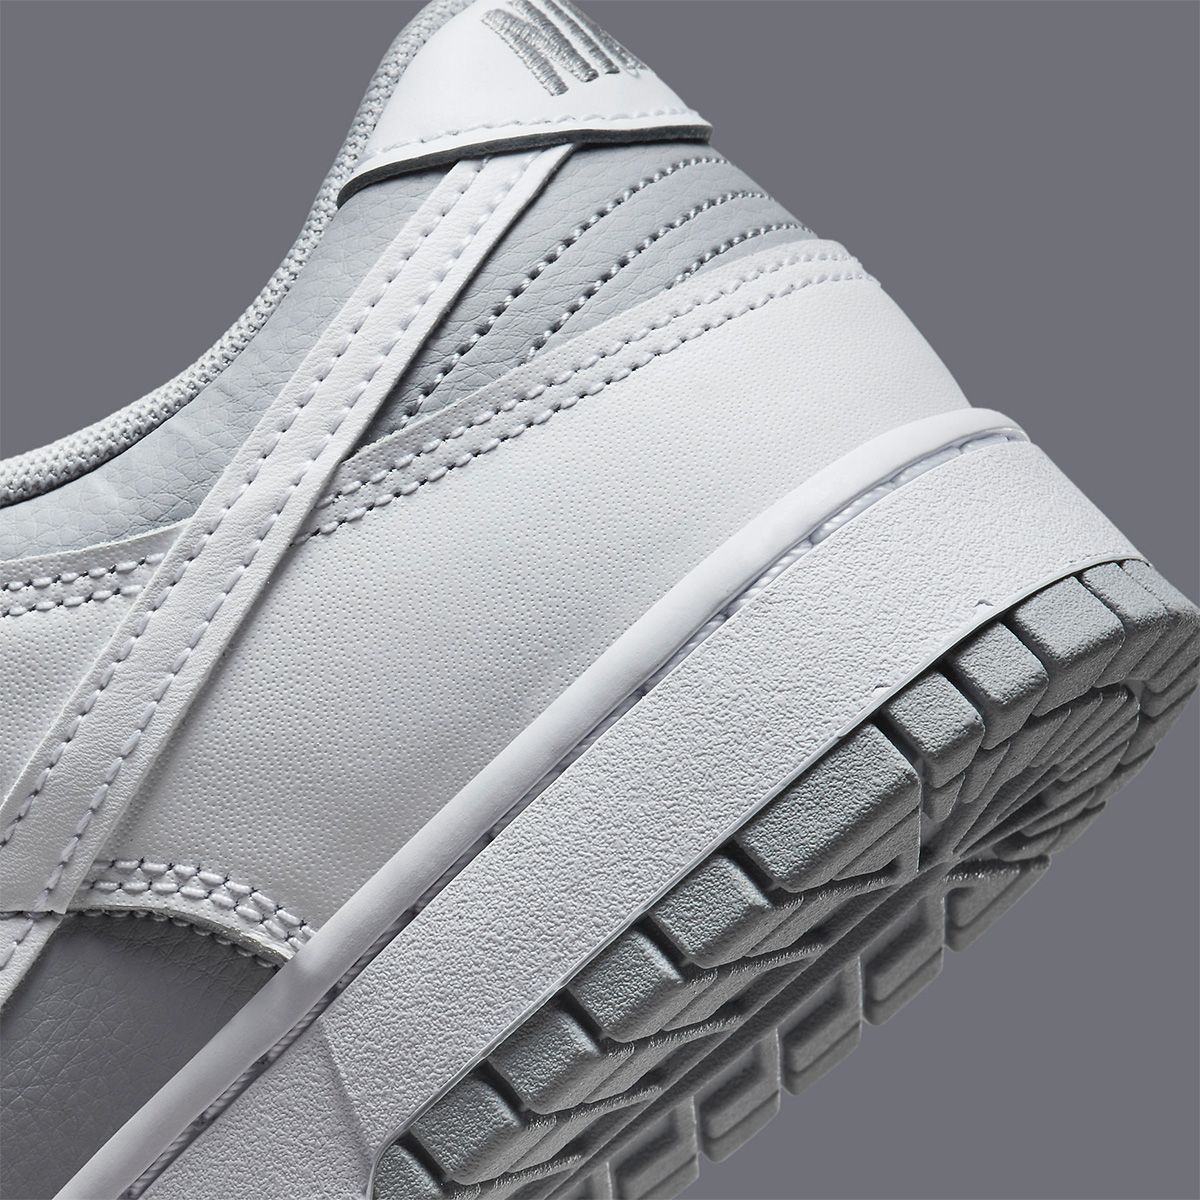 The Nike Dunk Low Appears in New Grey and White Build | HOUSE OF HEAT